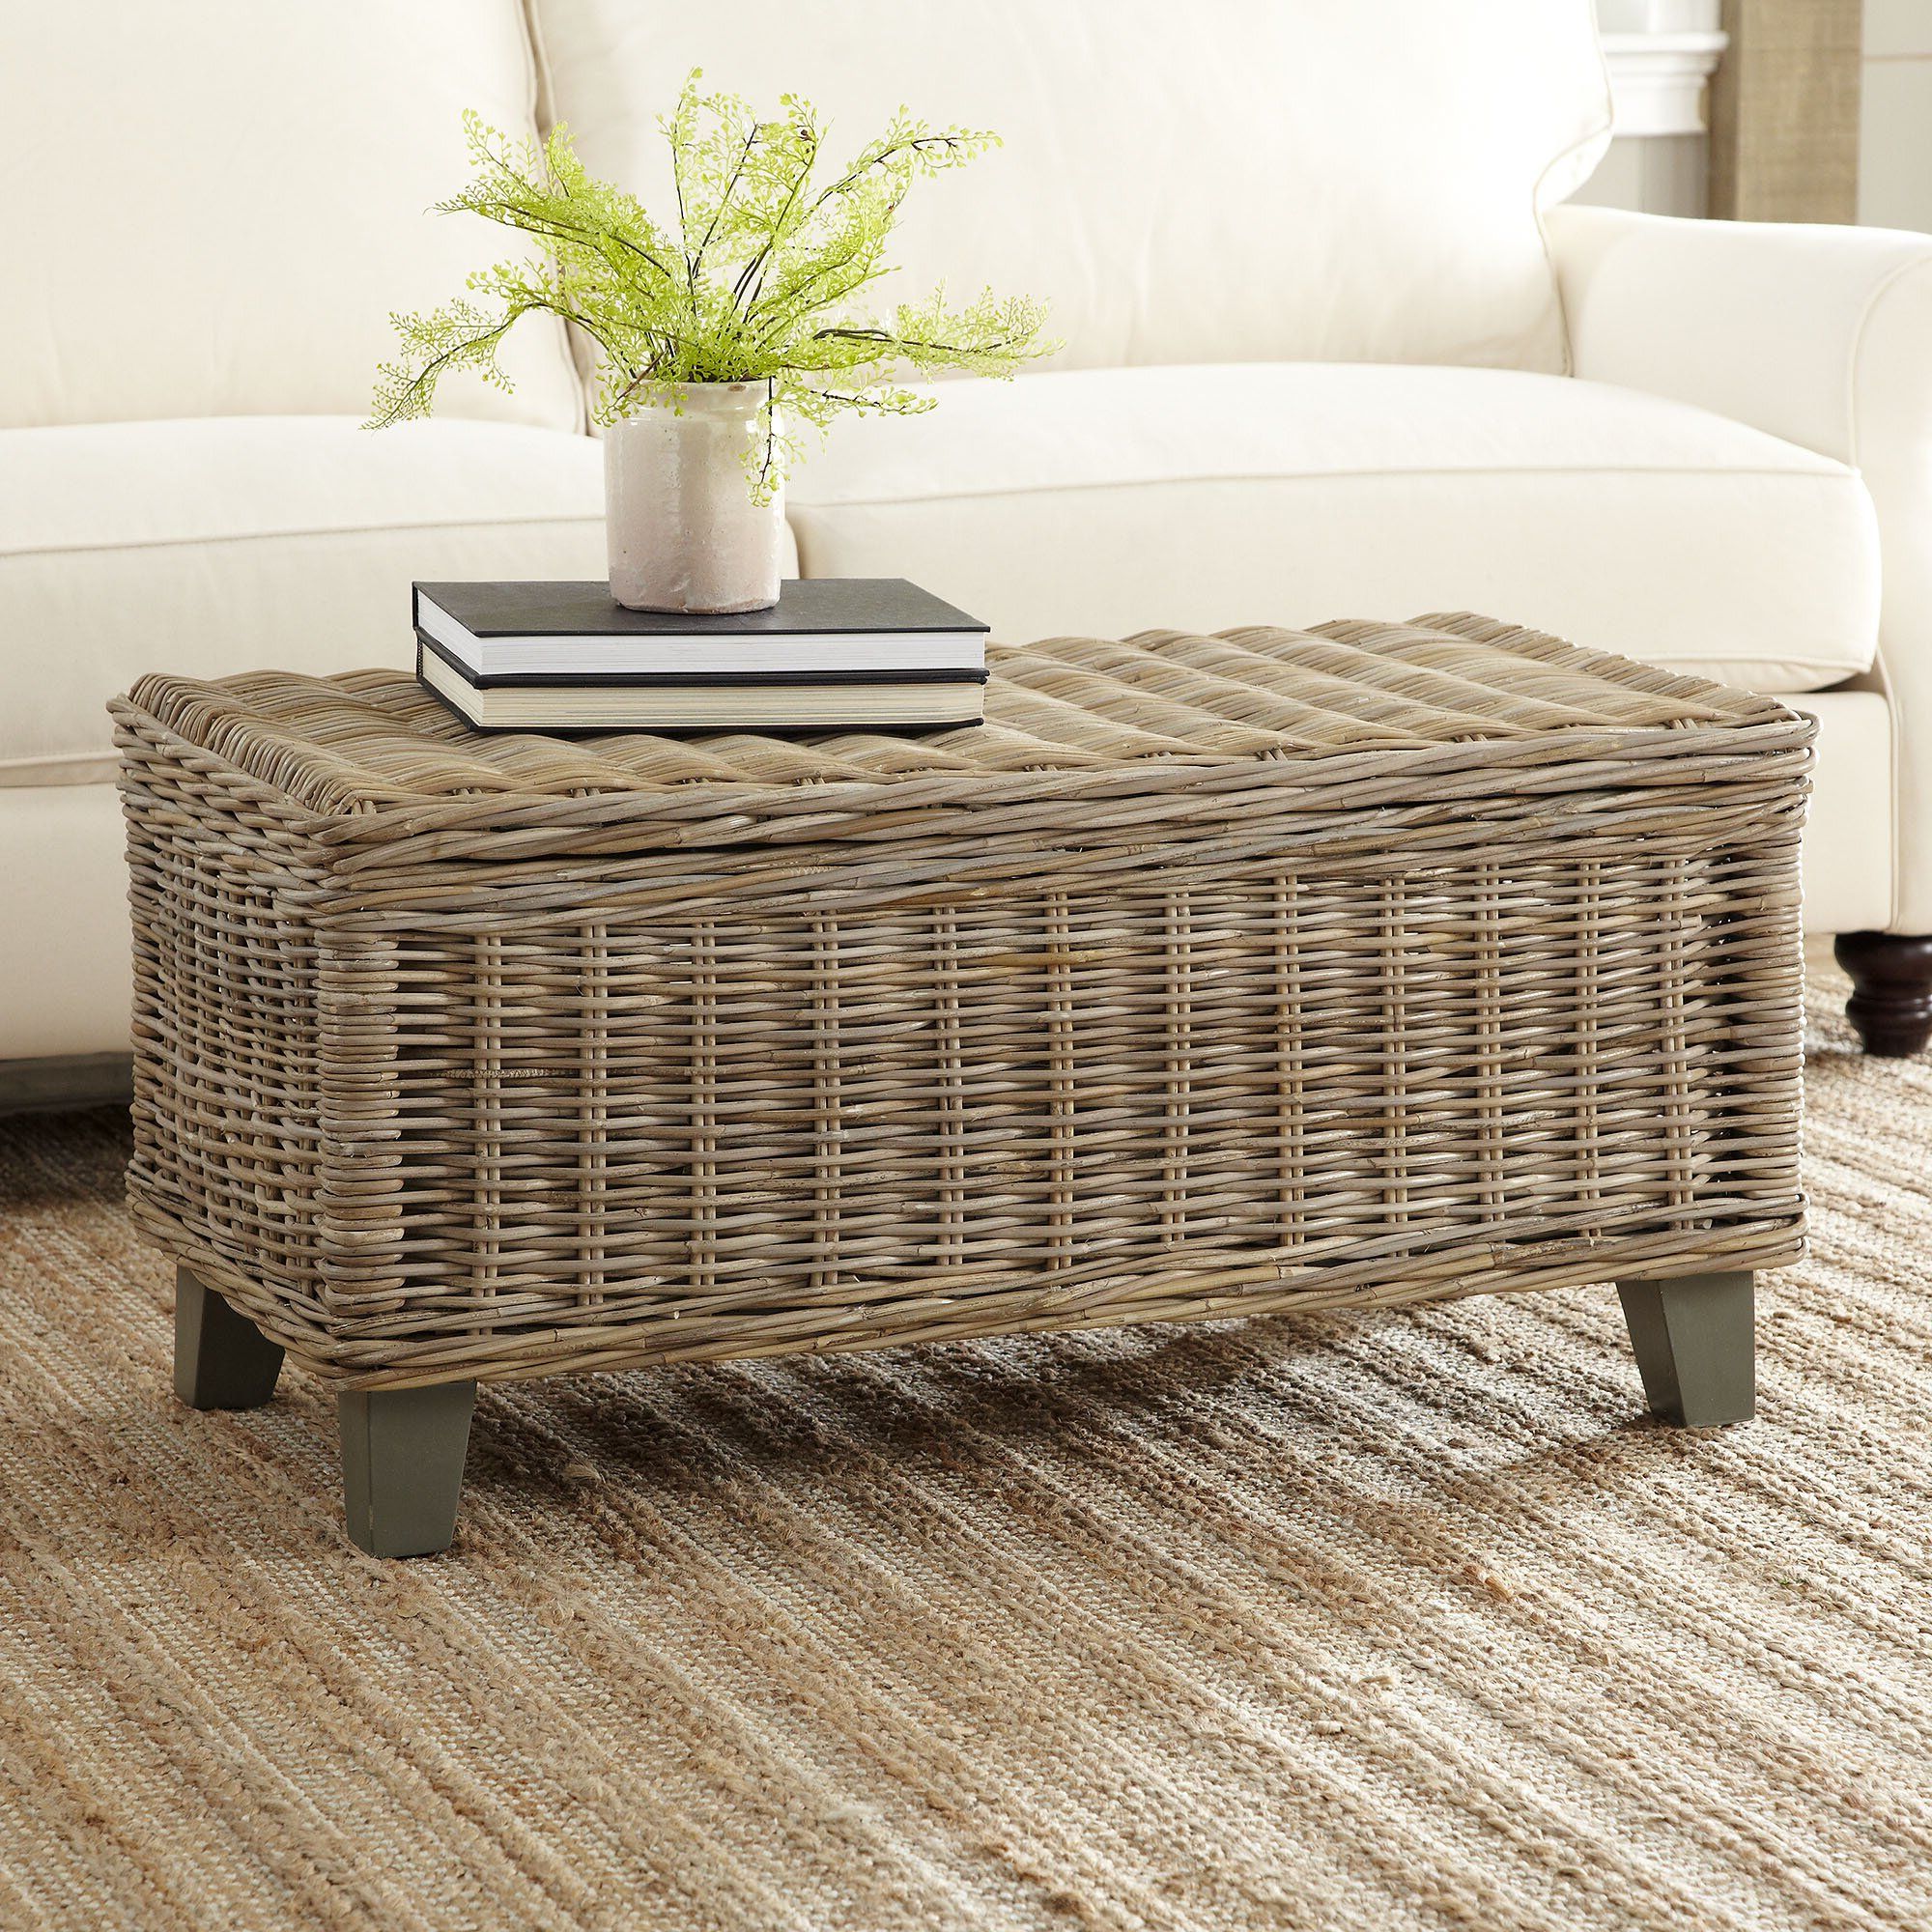 Most Recently Released Rattan Coffee Tables Inside Rivera Rattan Coffee Table (View 3 of 15)